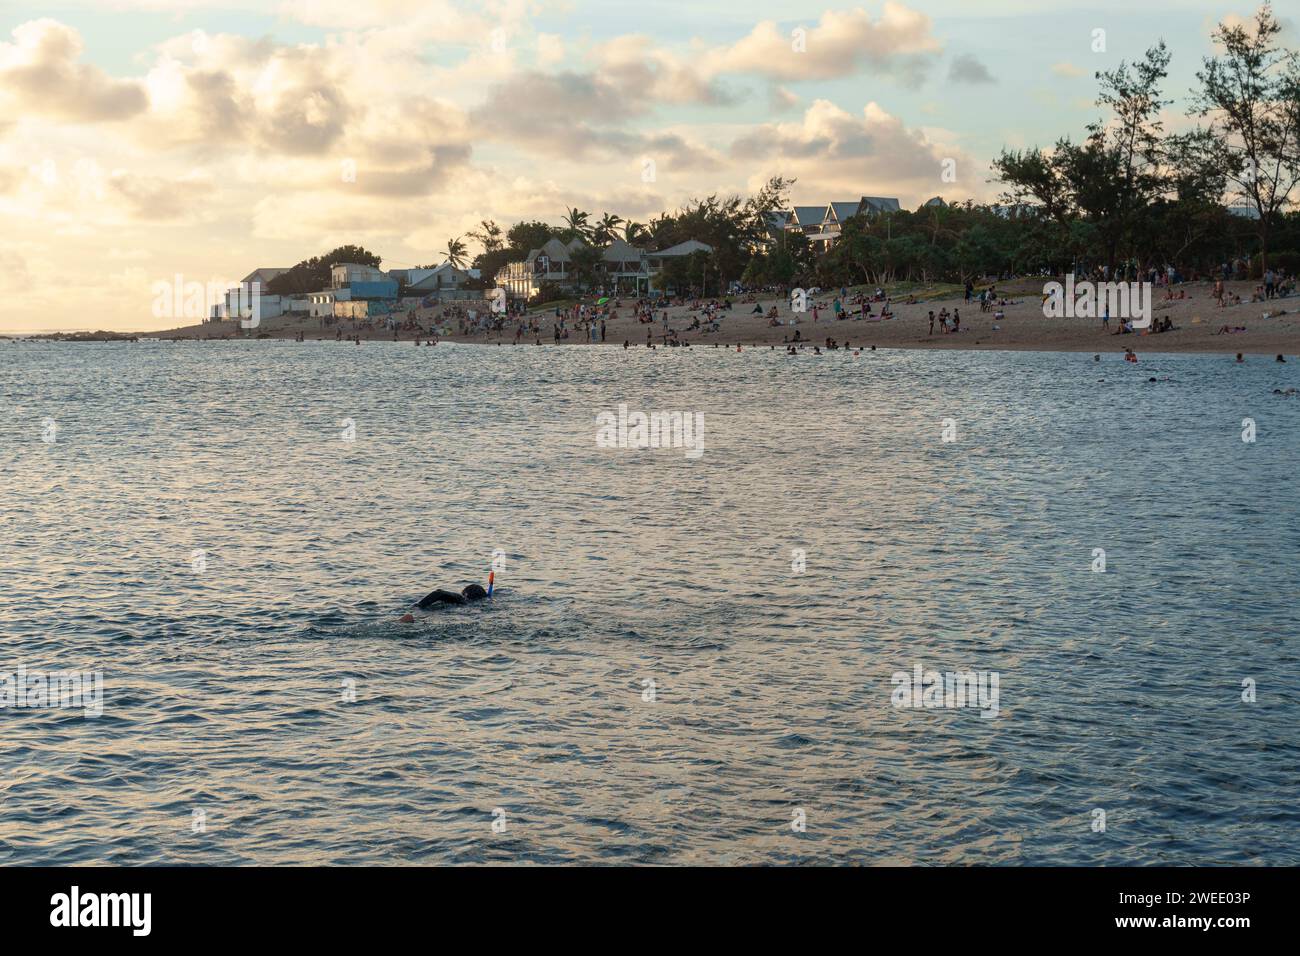 A swimmer in the lagoon of Saint-Pierre, Réunion Island, wearing a mask and snorkel, at sunset. Stock Photo